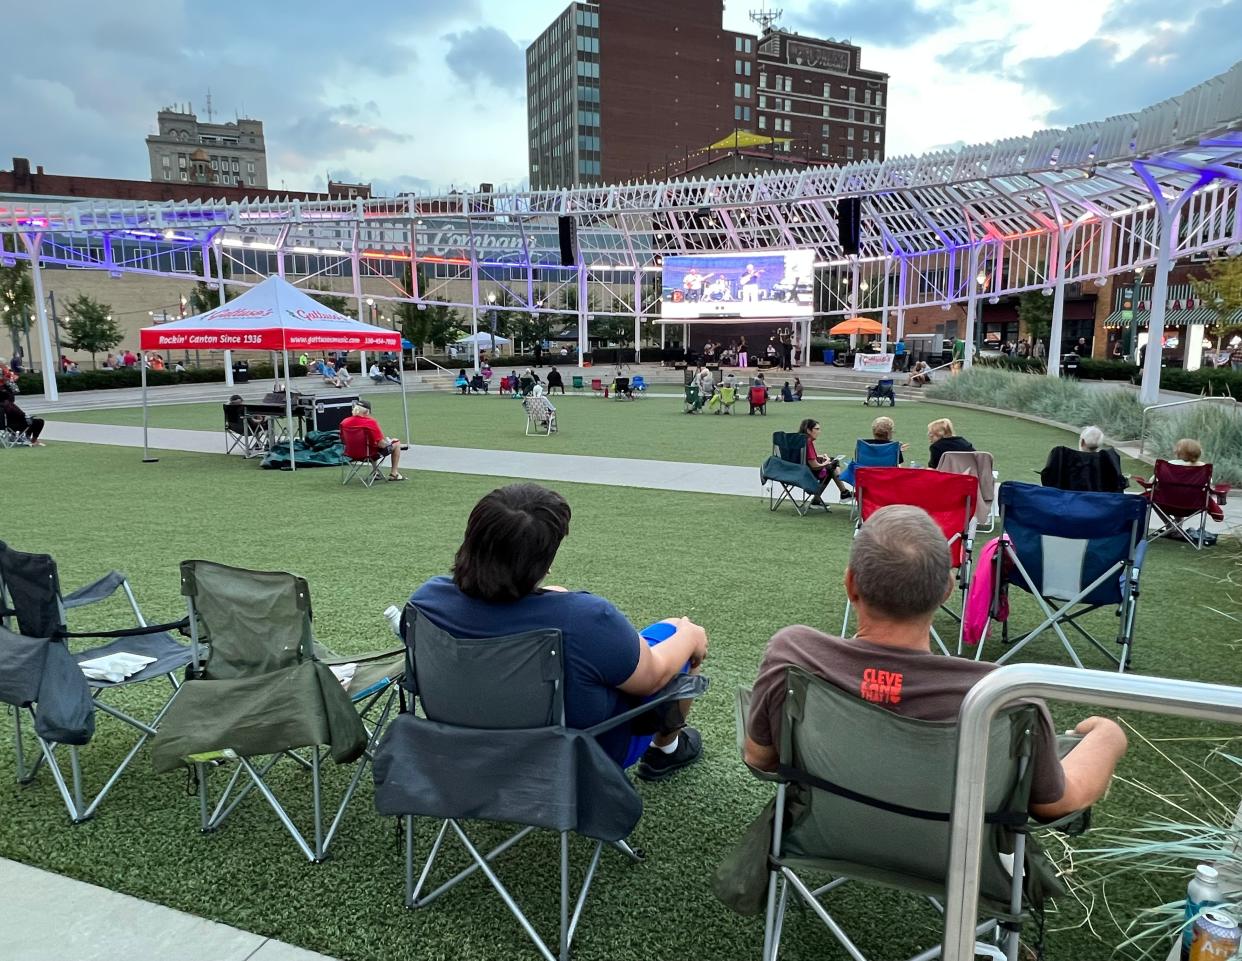 Concertgoers watch a band perform on the first day of the Downtown Canton Music Fest at Centennial Plaza. The event is not returning this summer.